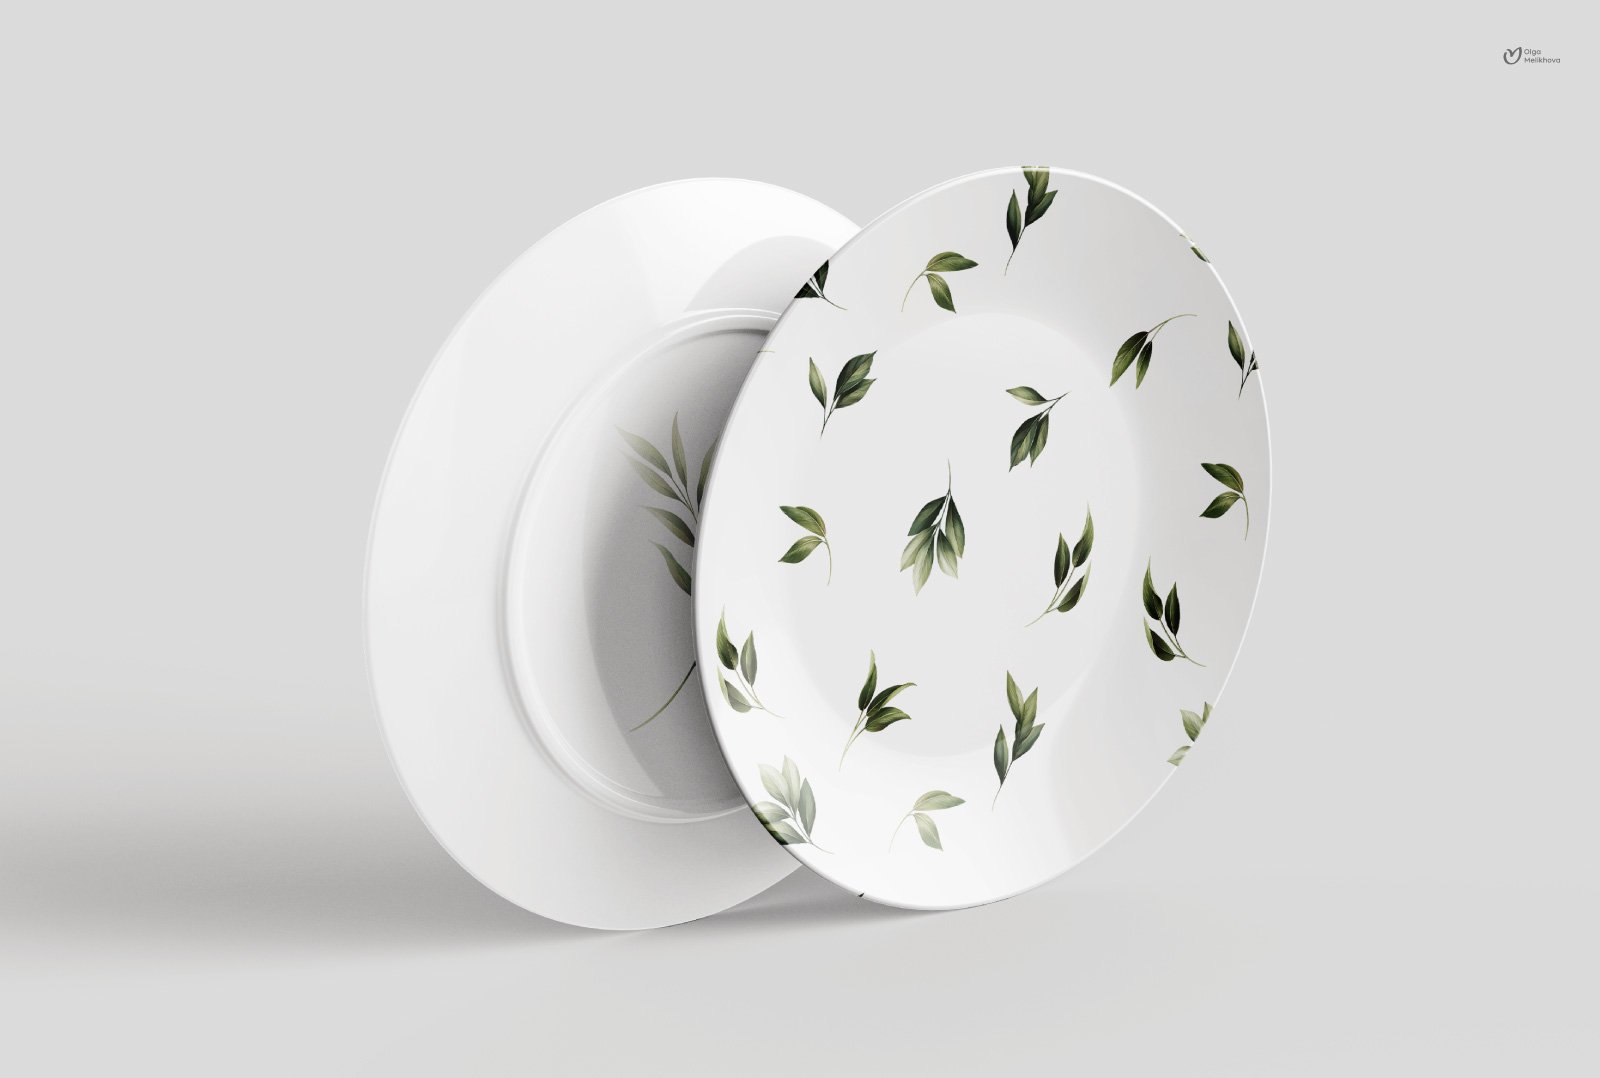 Two white plates with green leaves on them.